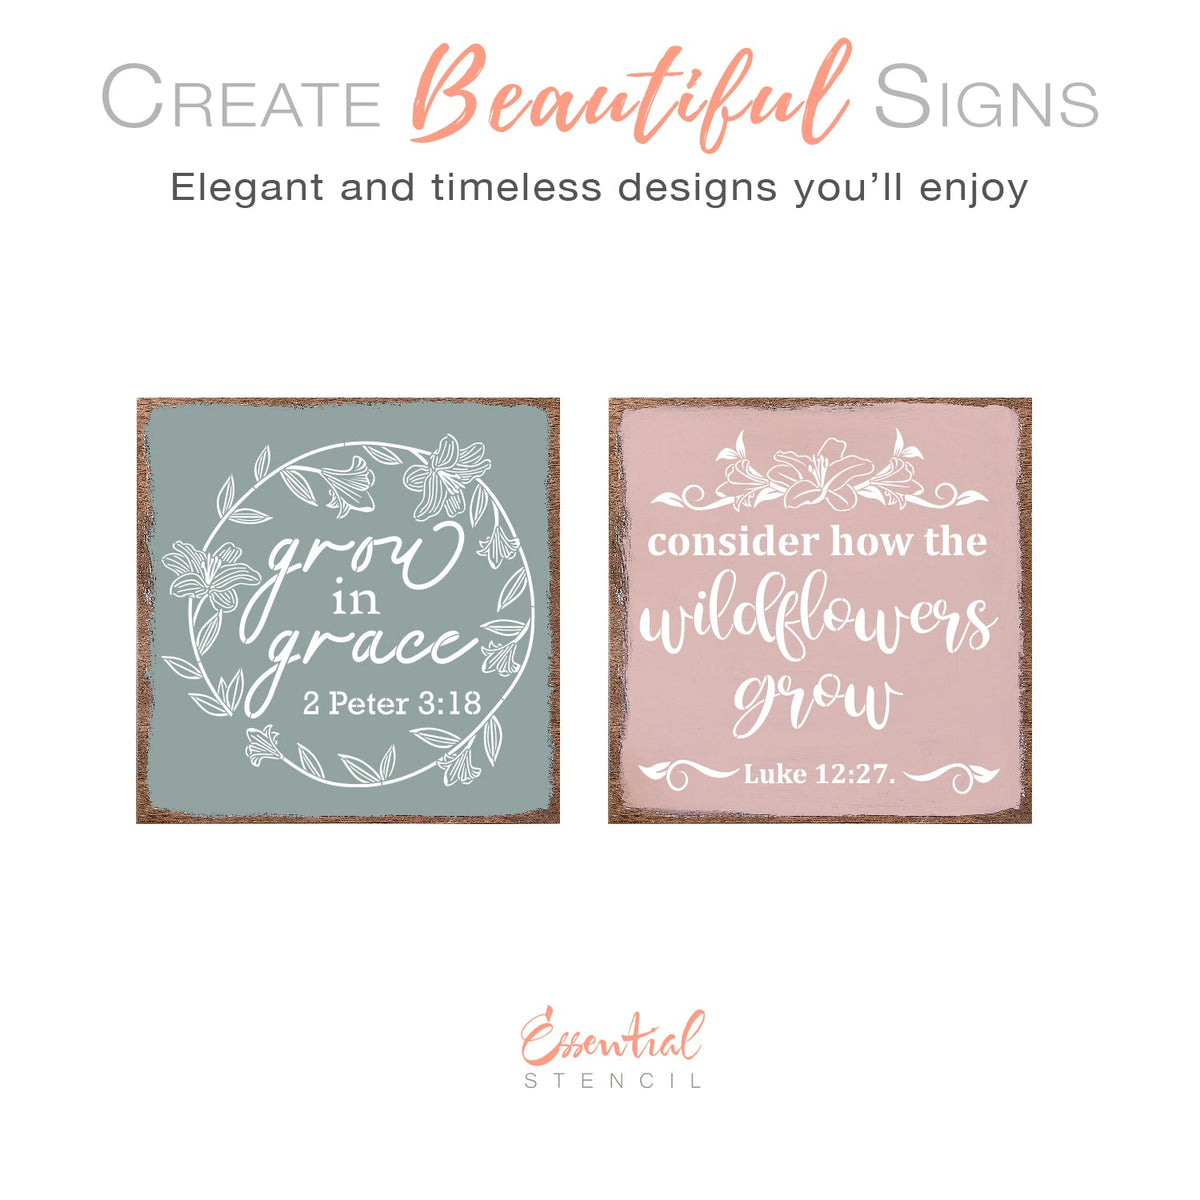 DIY Wooden Plaque - Timeless Creations